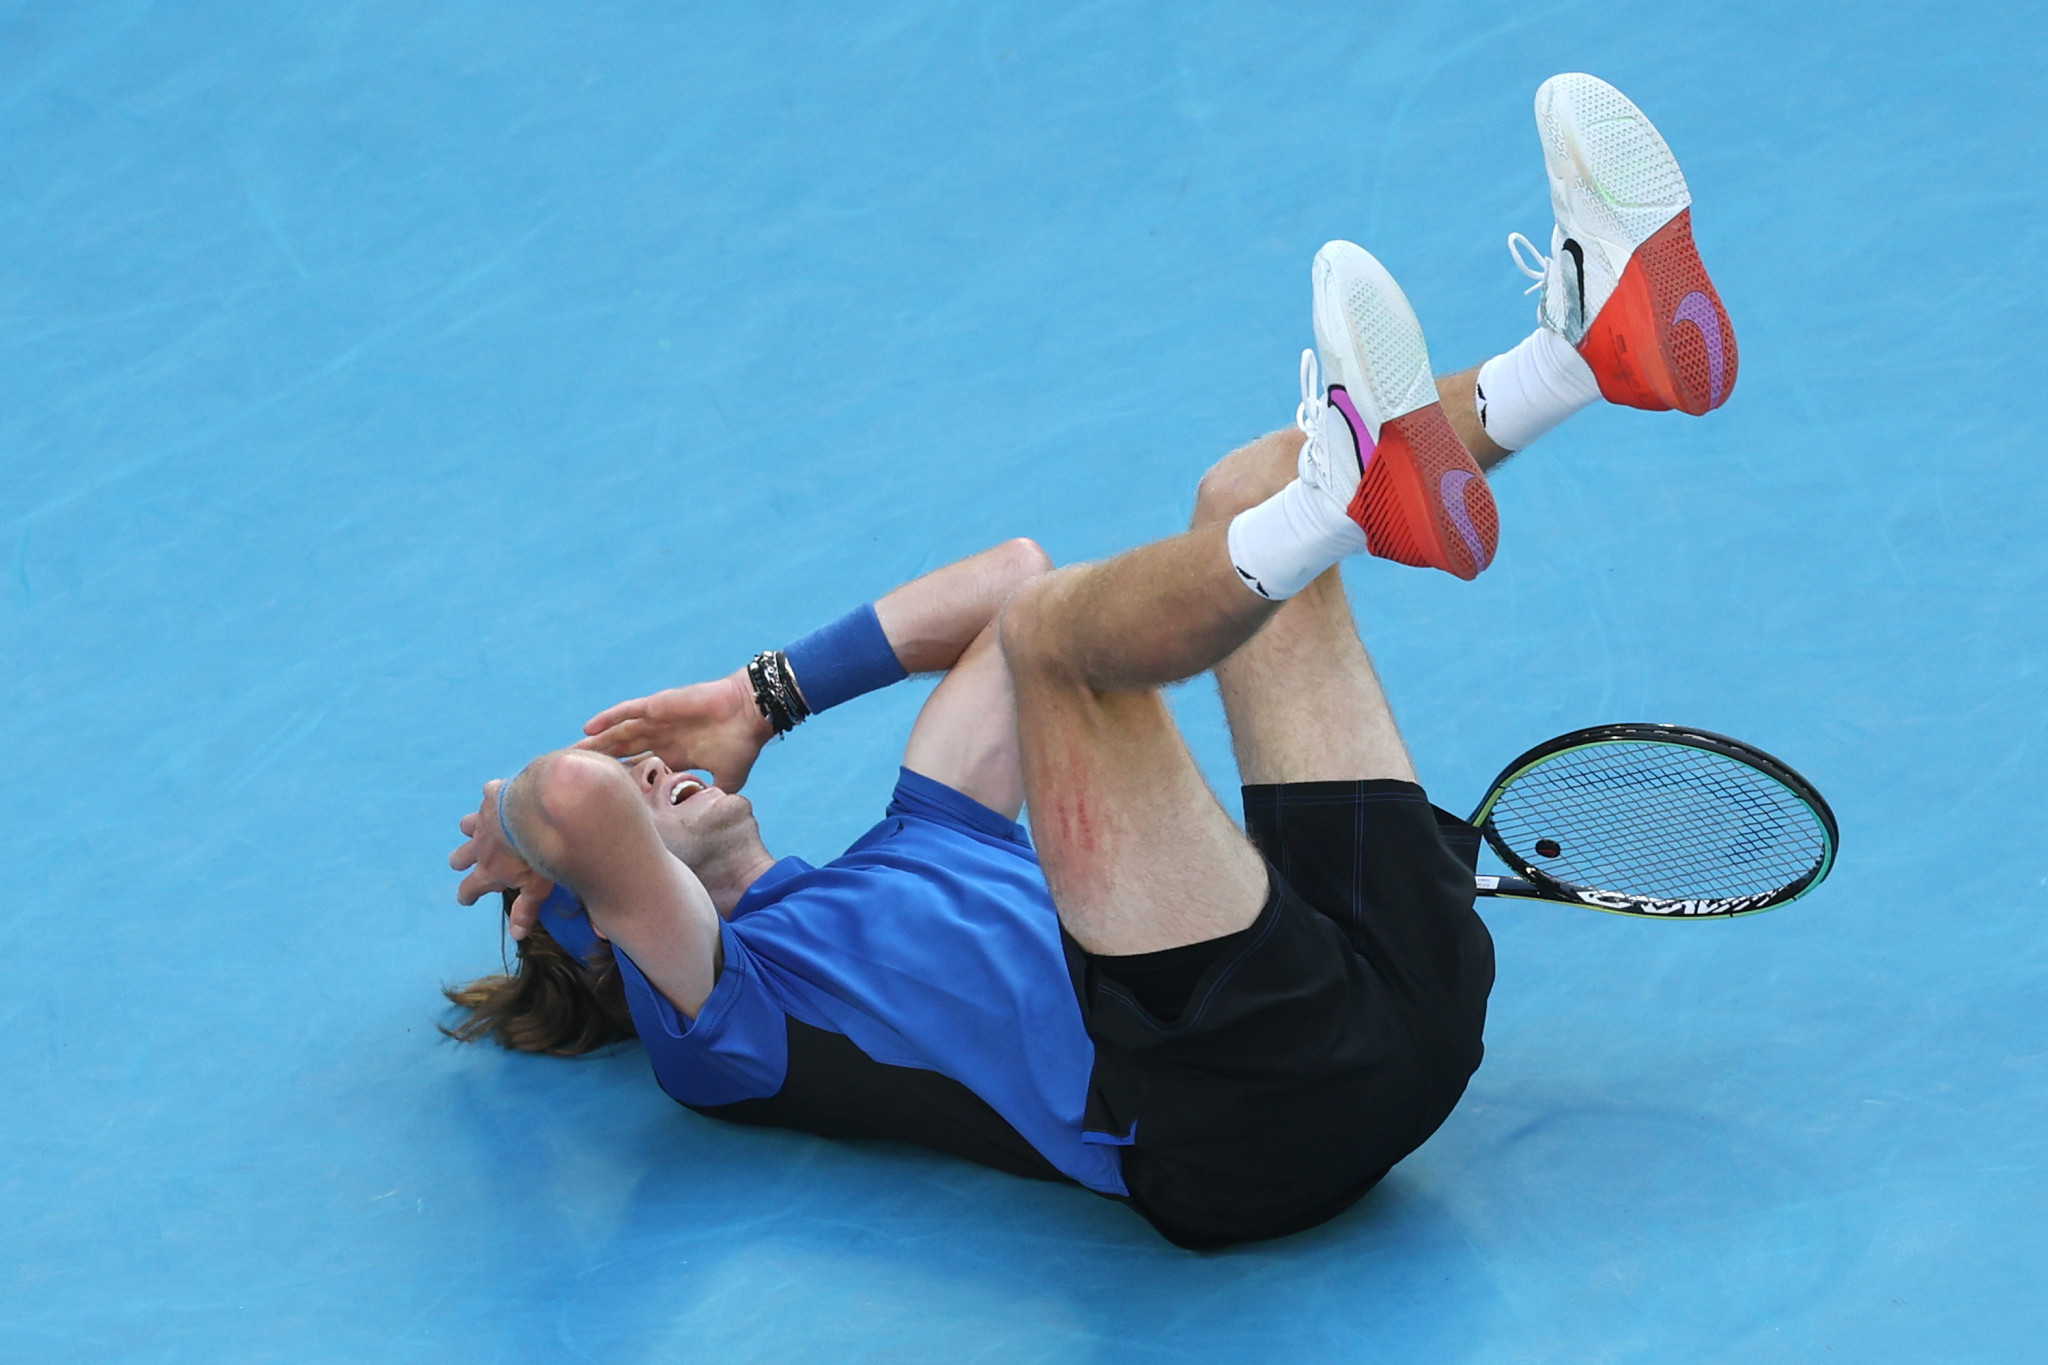 Andrey Rublev collapsed to the ground after triumphing in a fifth set tie-break as he won an epic contest with Holger Rune ©Getty Images